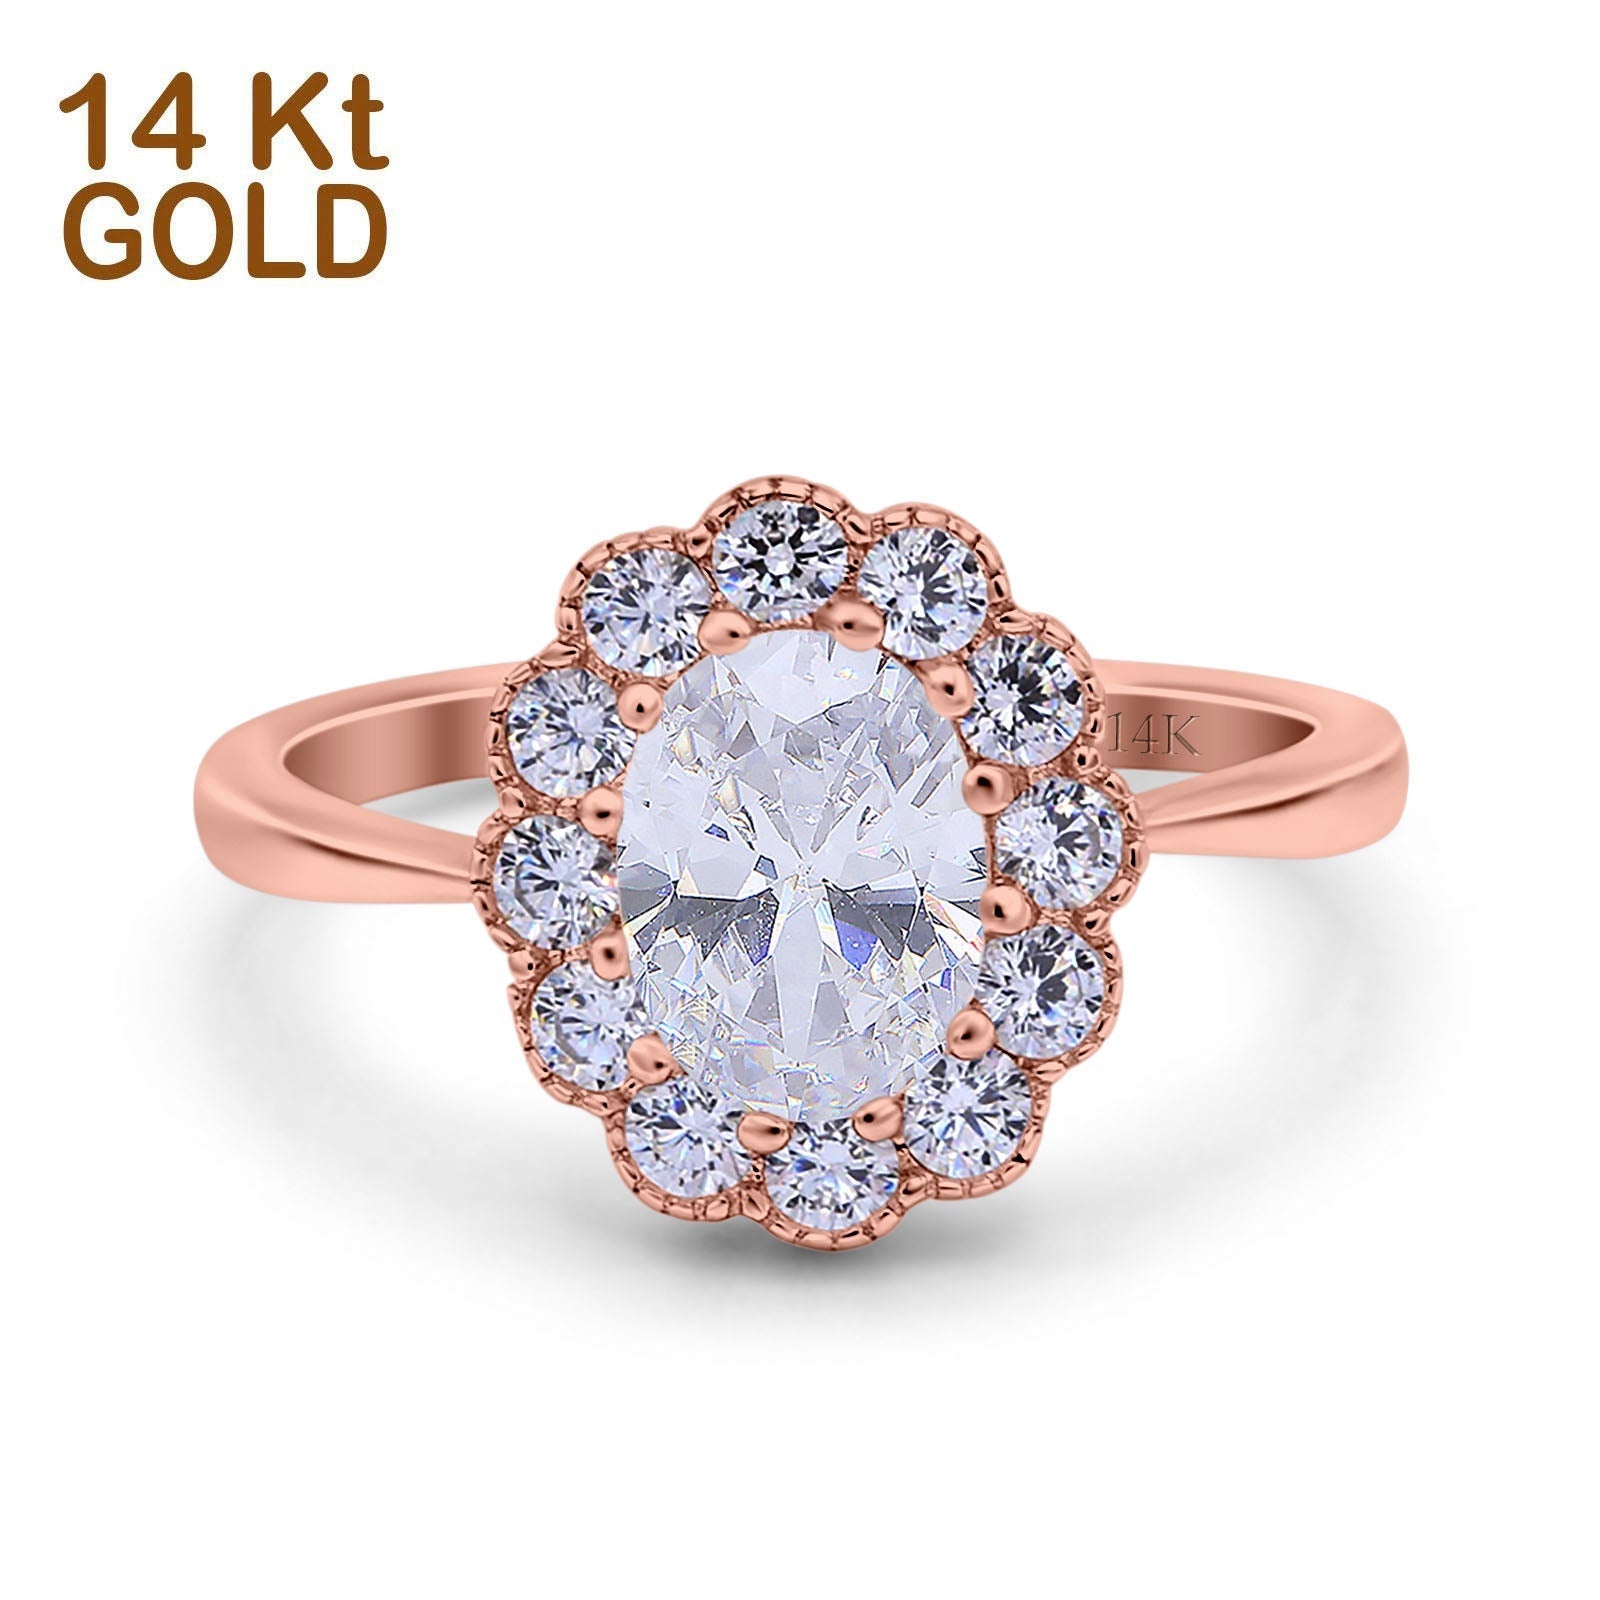 14K Gold Vintage Floral Oval Shape Simulated Cubic Zirconia Bridal Wedding Engagement Ring